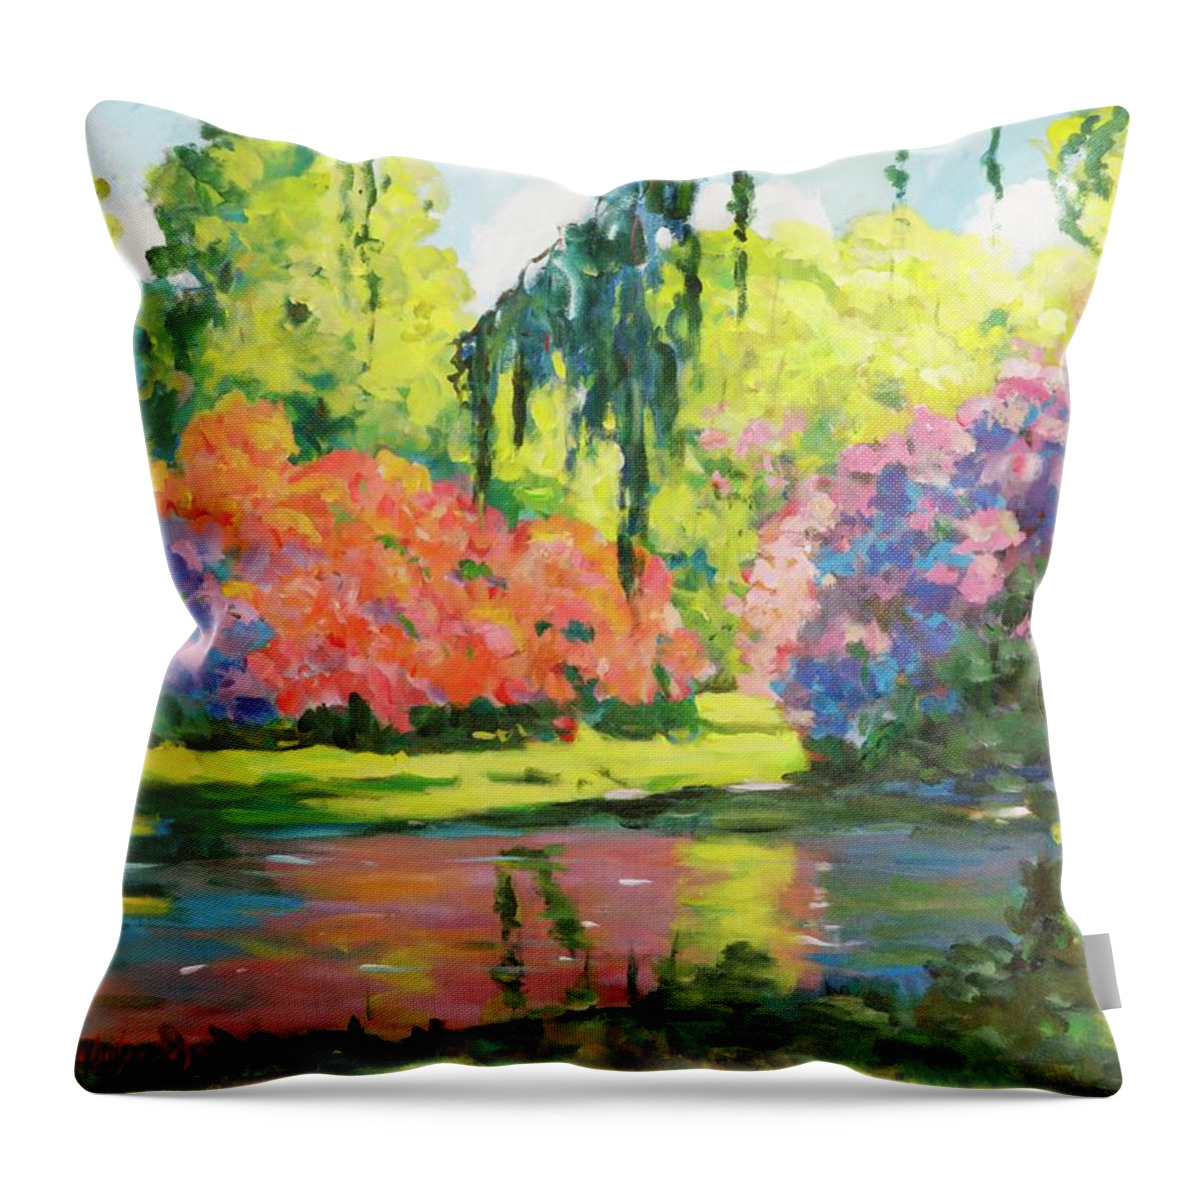 Landscape Throw Pillow featuring the painting Untitled #1 by Ingrid Dohm